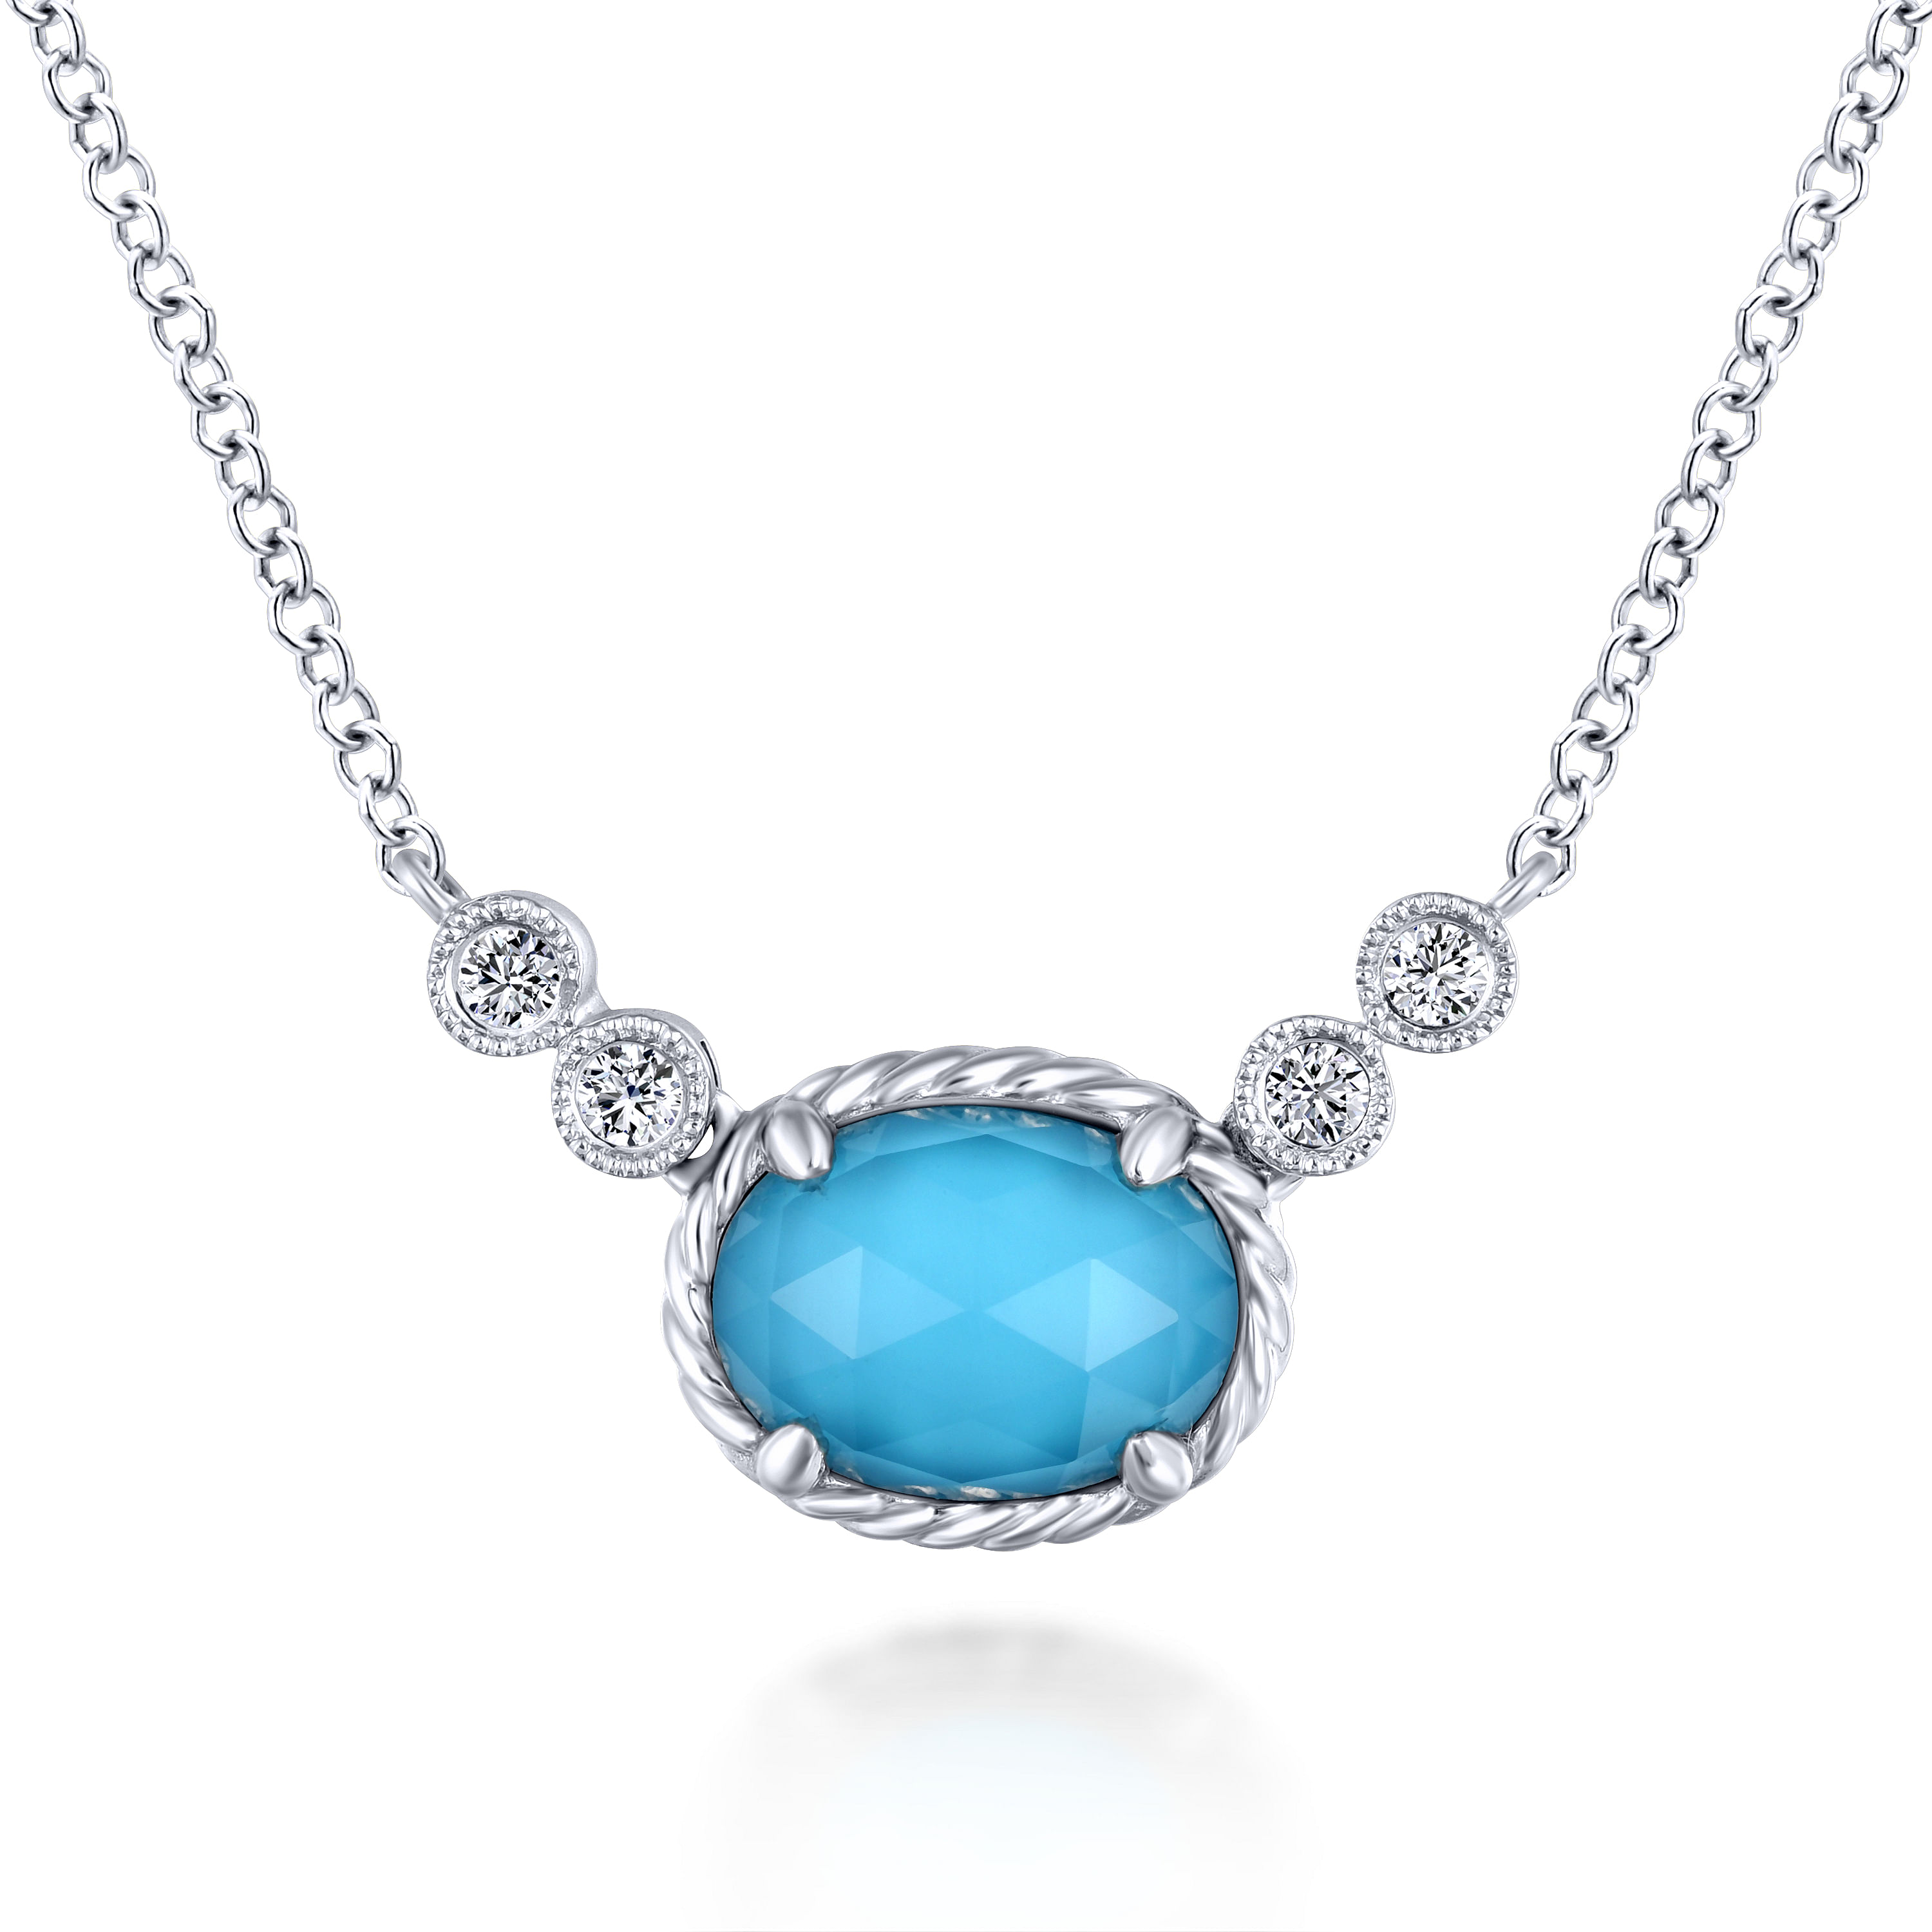 14K White Gold Oval Rock Crystal/Turquoise and Diamond Pendant Necklace